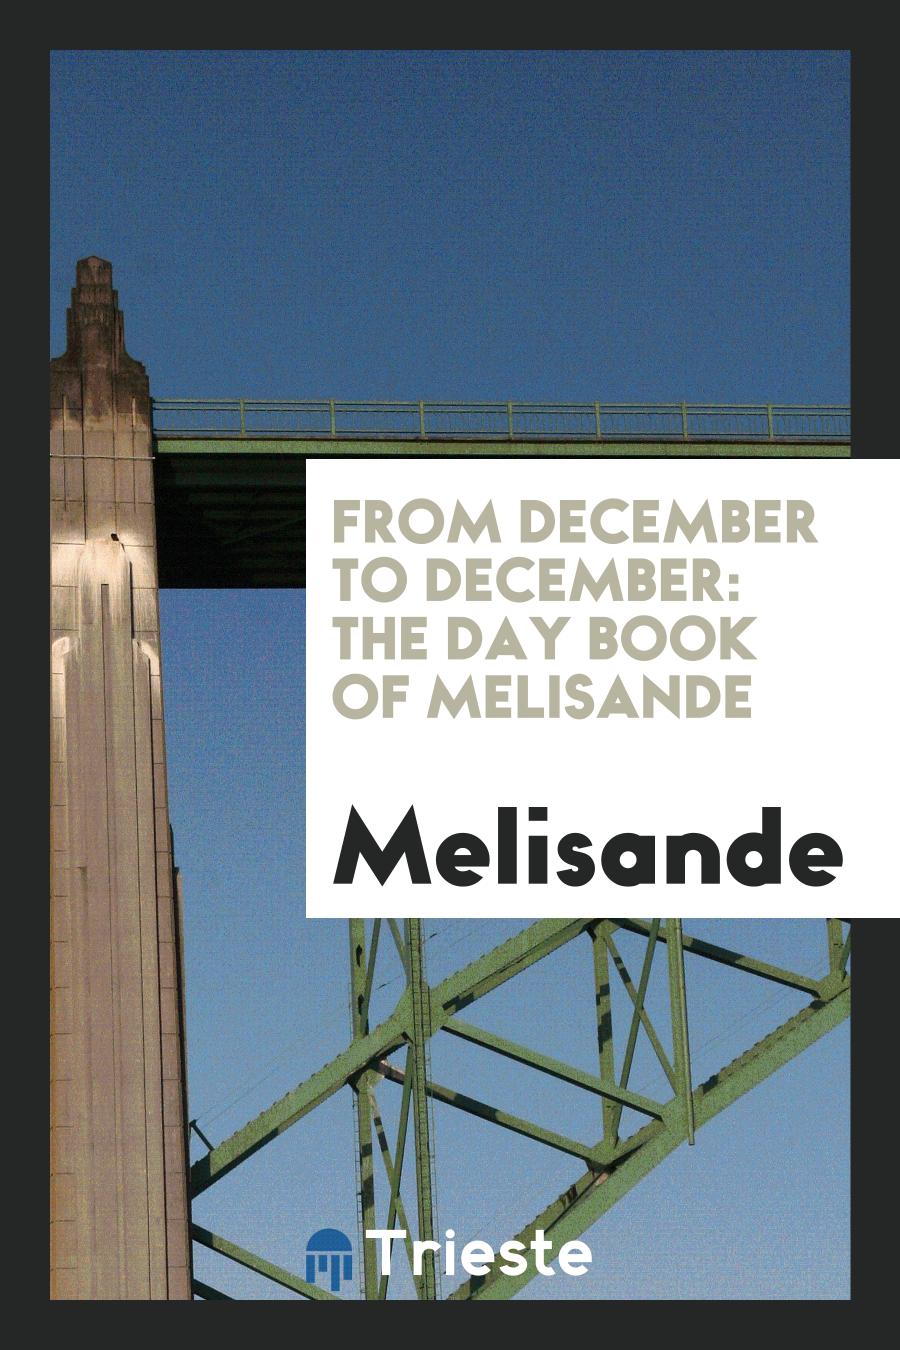 From December to December: The Day Book of Melisande